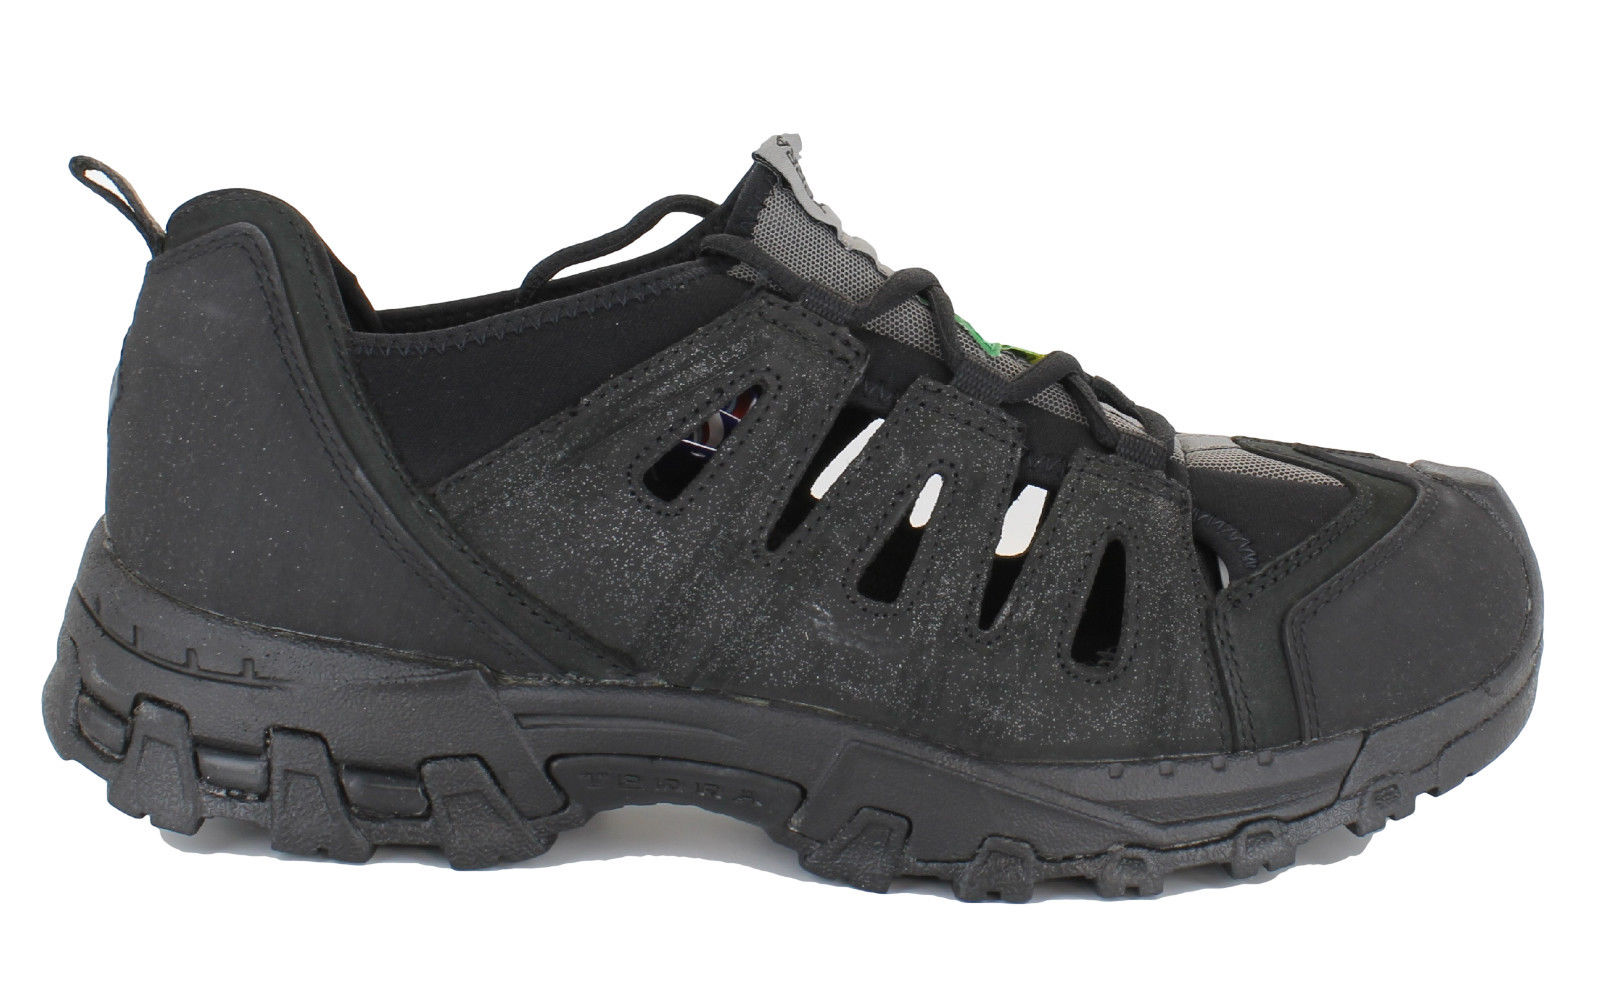 Terra Blitz Mens S1P Safety Steel Toe Sandals Open Side Shoes Trainers | eBay